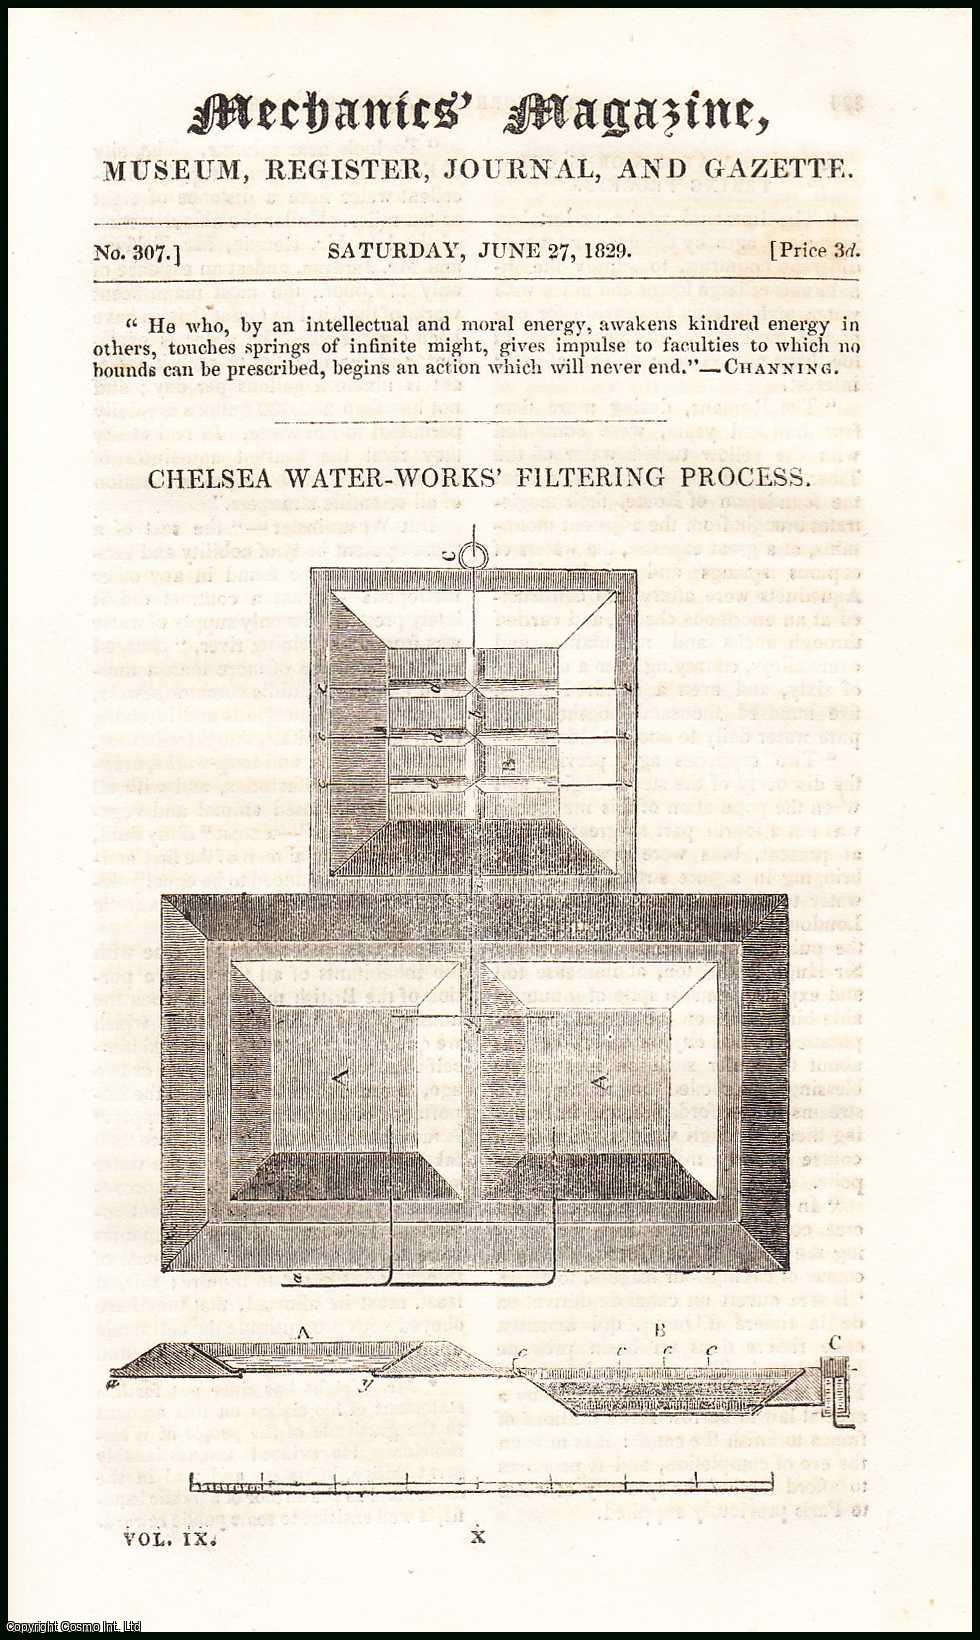 Mechanics Magazine - Chelsea Water-Works Filtering Process; Process for making Porter or Brown Stout from Ale; Long's Steam Pump; the Motion of the Earth, etc. Mechanics Magazine, Museum, Register, Journal and Gazette. Issue No. 307. A complete rare weekly issue of the Mechanics' Magazine, 1829.